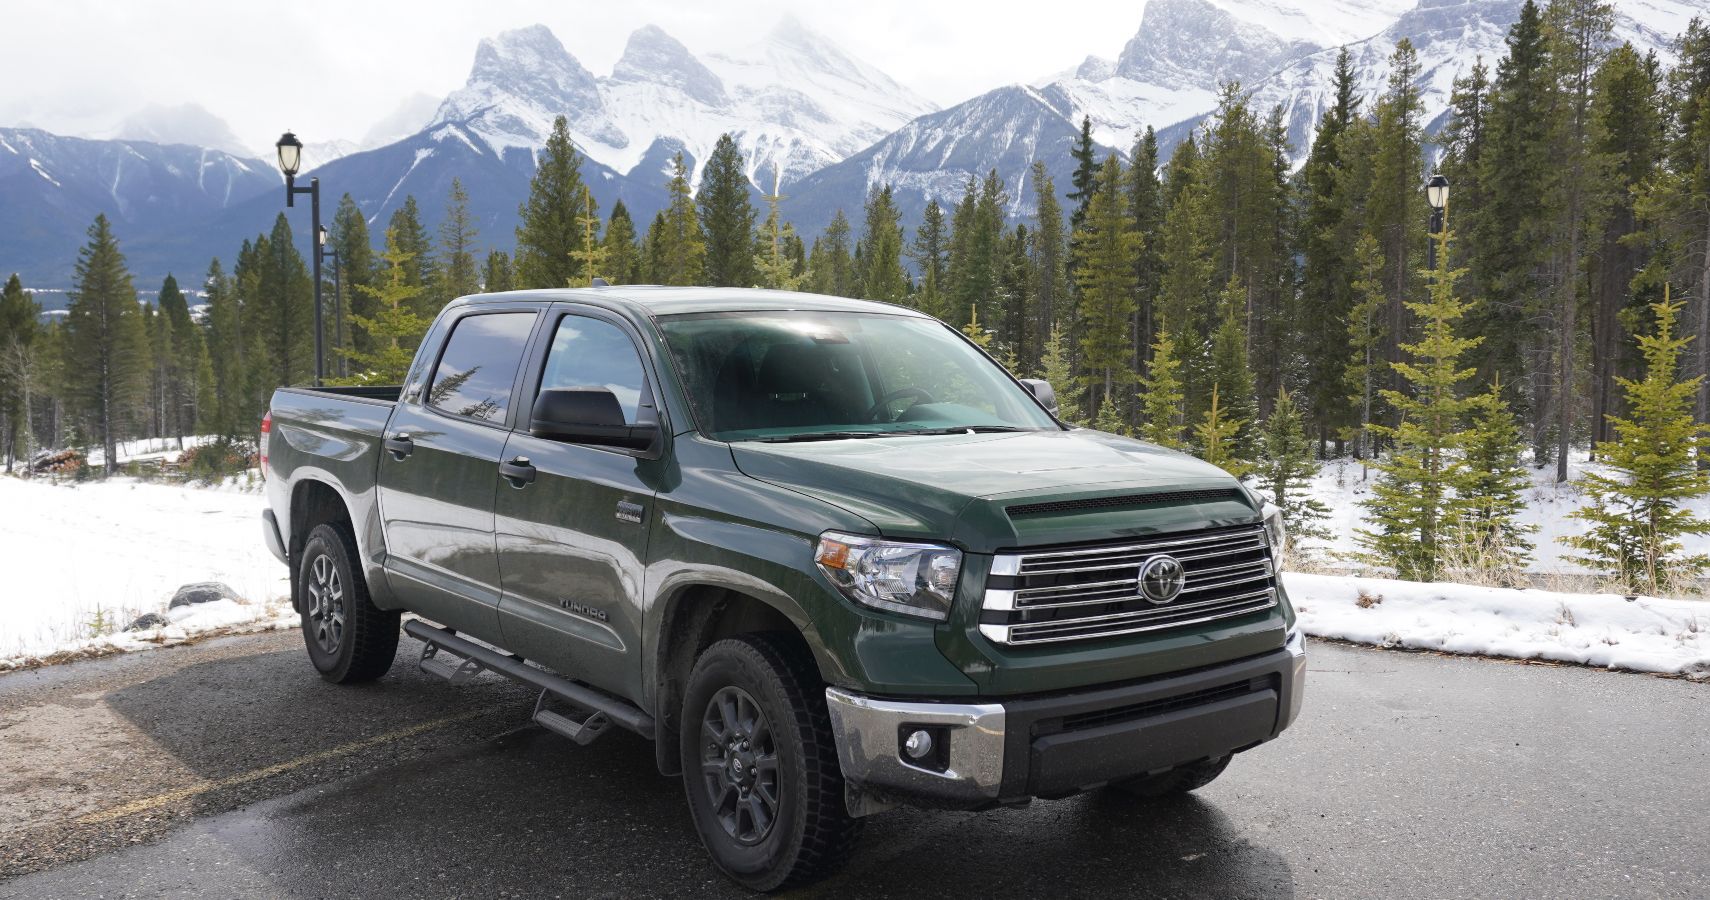 2021 Toyota Tundra Trail Edition Review: Smooth Sailing To The Next